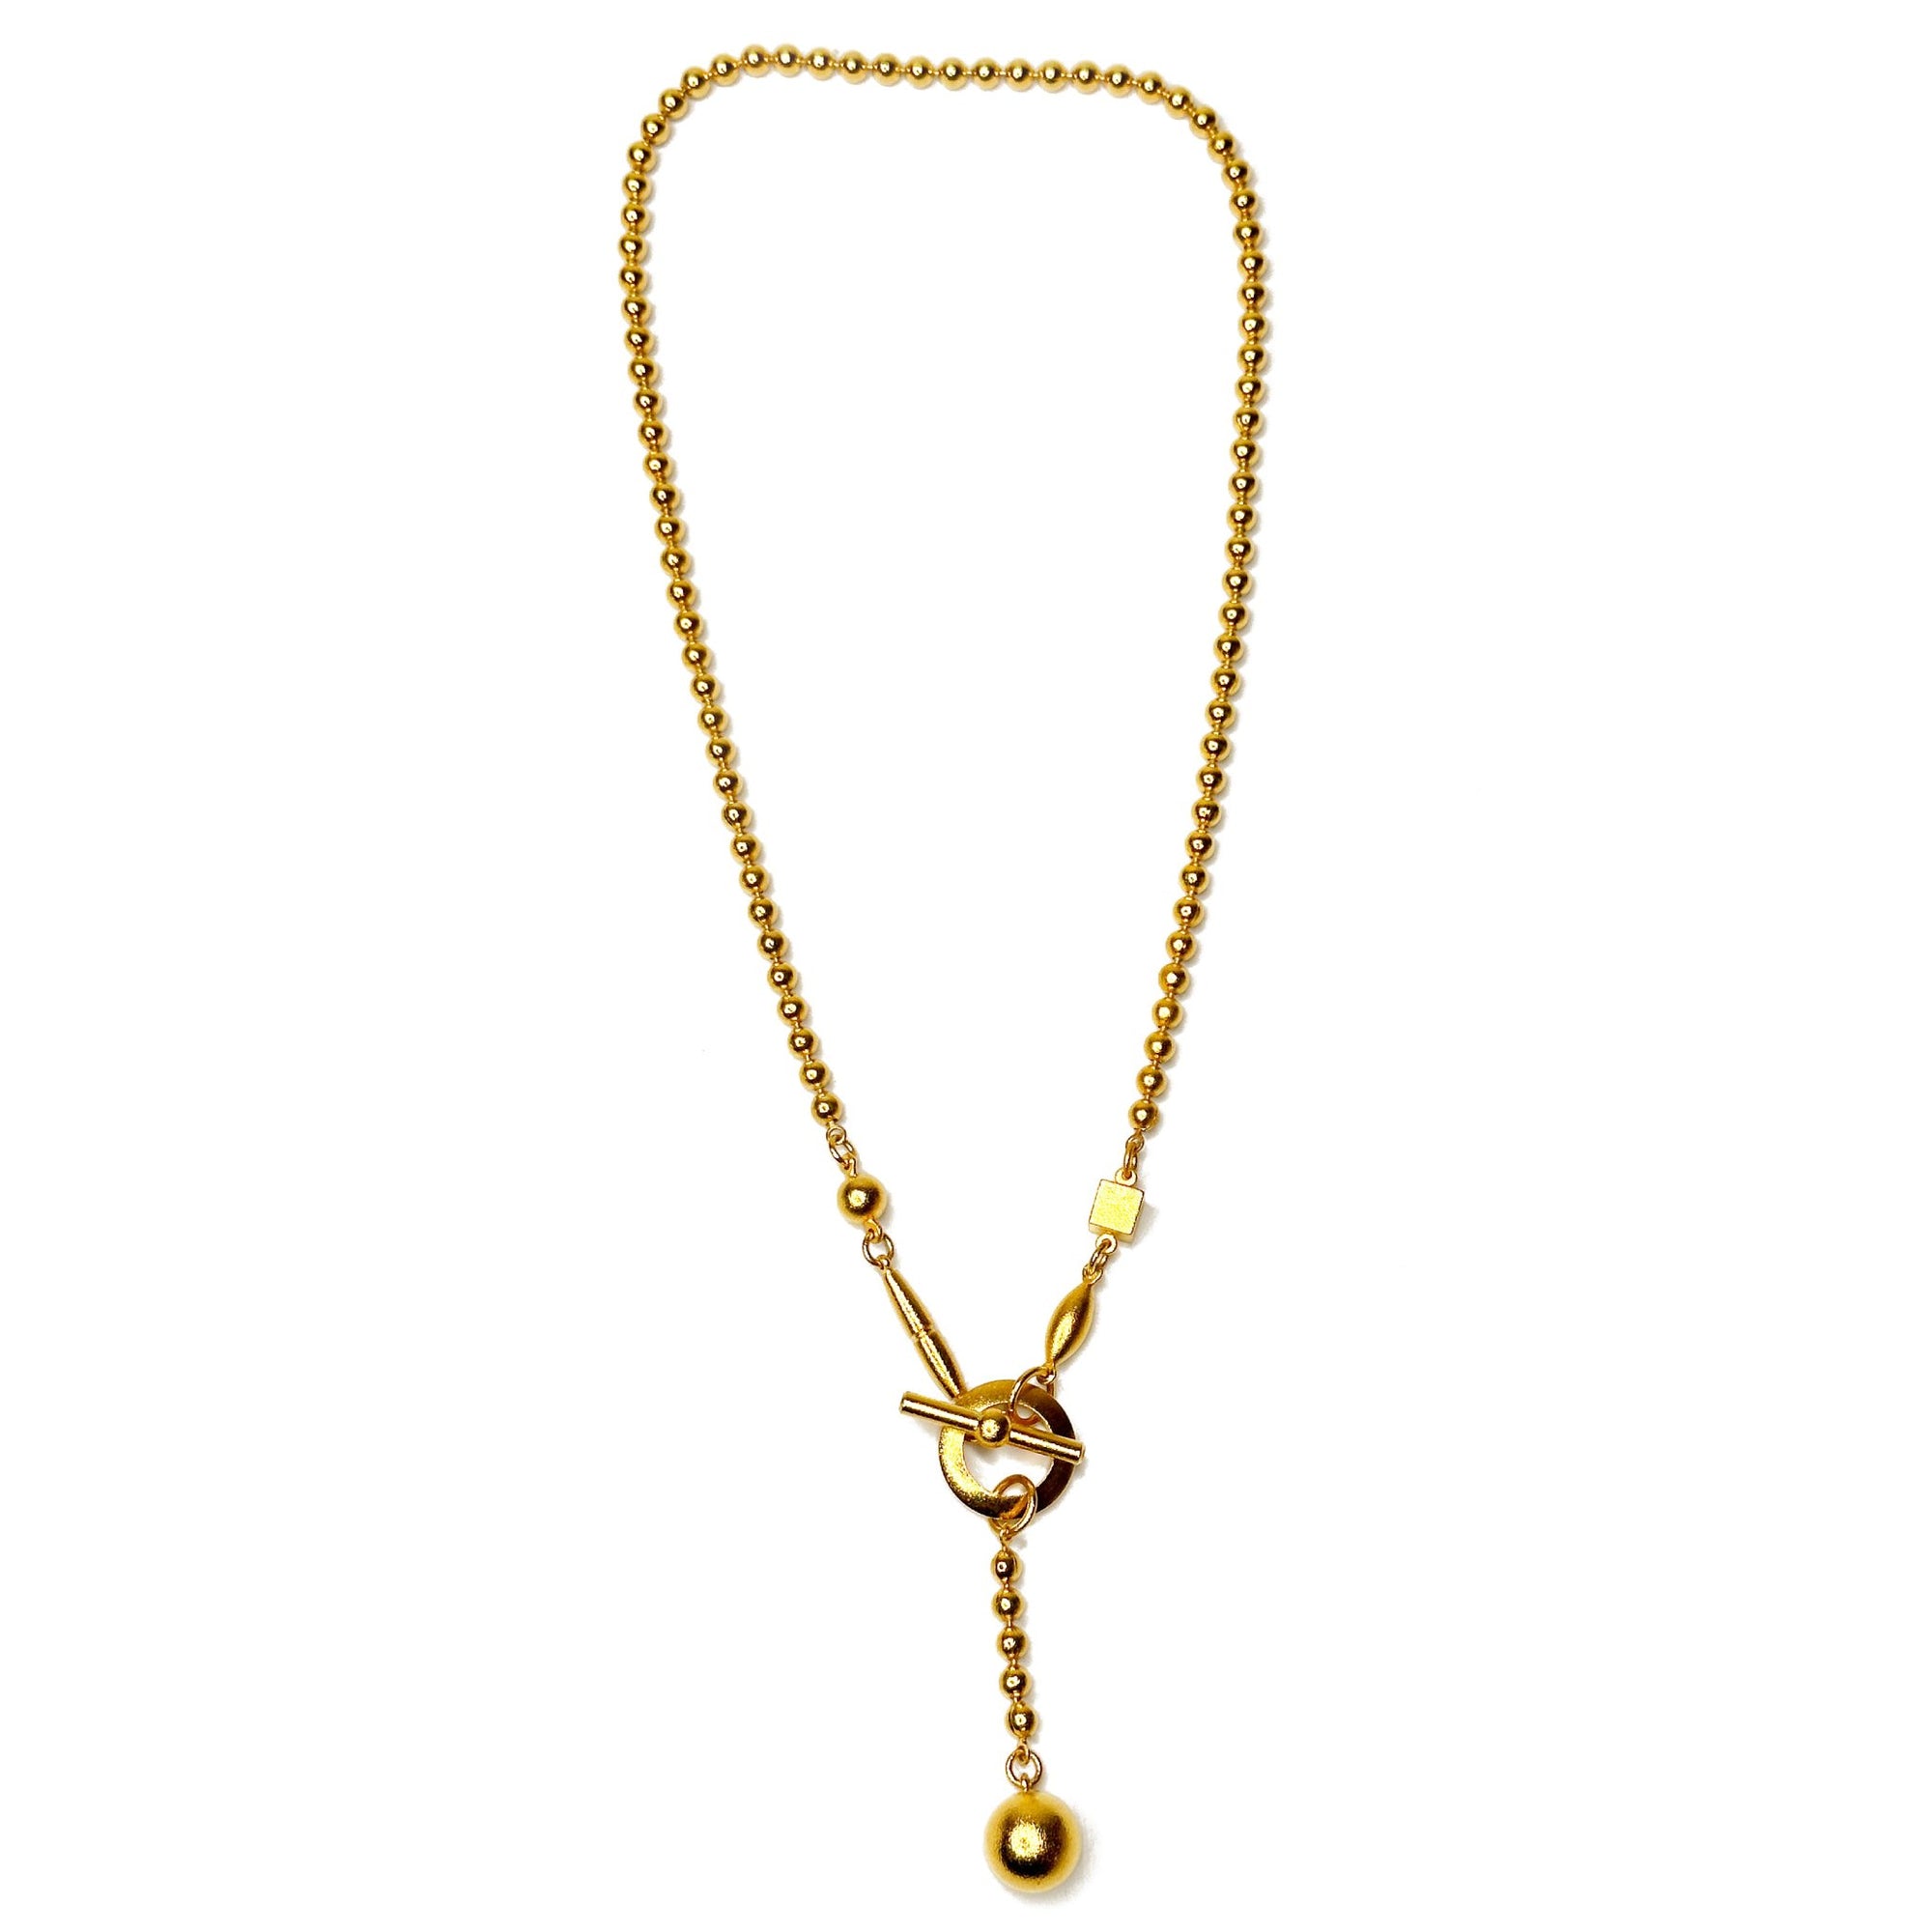 Gold Bead Chain Necklace with Front Ball Drop | Erica Zap Designs